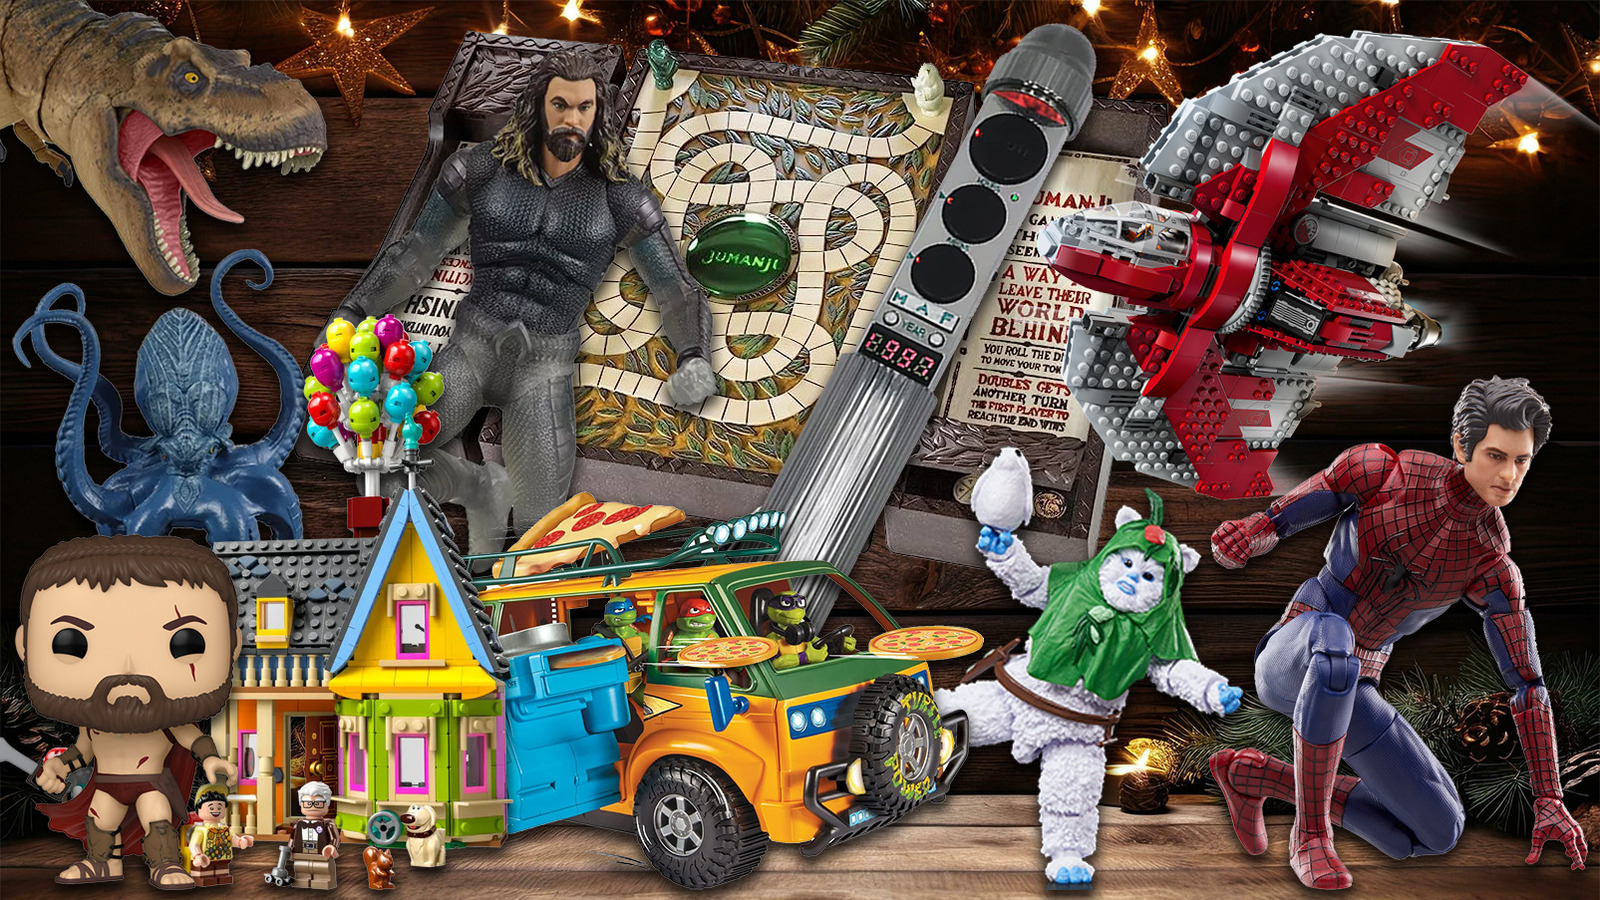 The 2023 /Film Holiday Gift Guide: Action Figures, Toys, Collectibles, Games, Prop Replicas & More